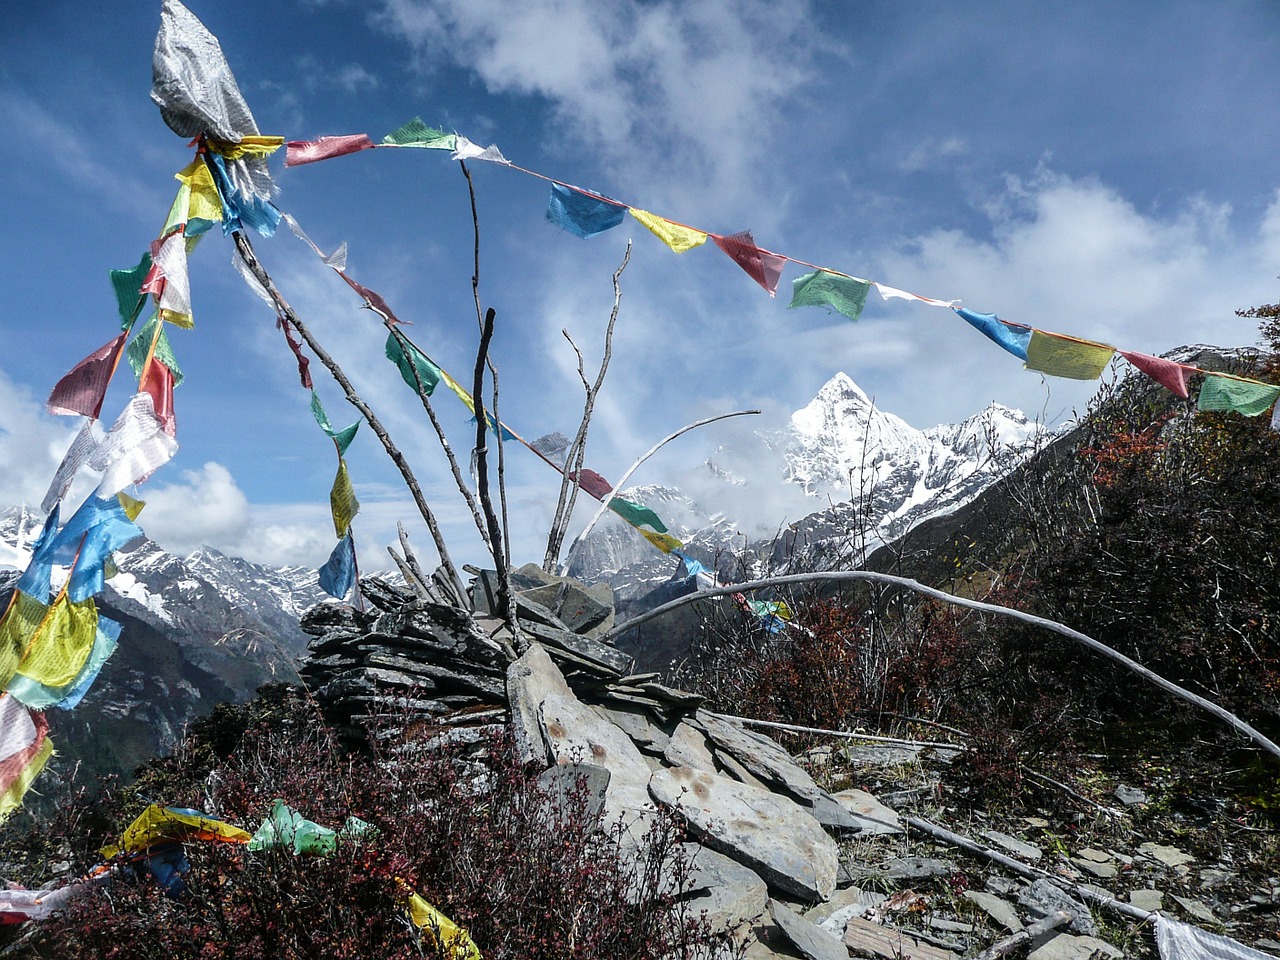 Himalayas with Tibetan prayer flags in foreground